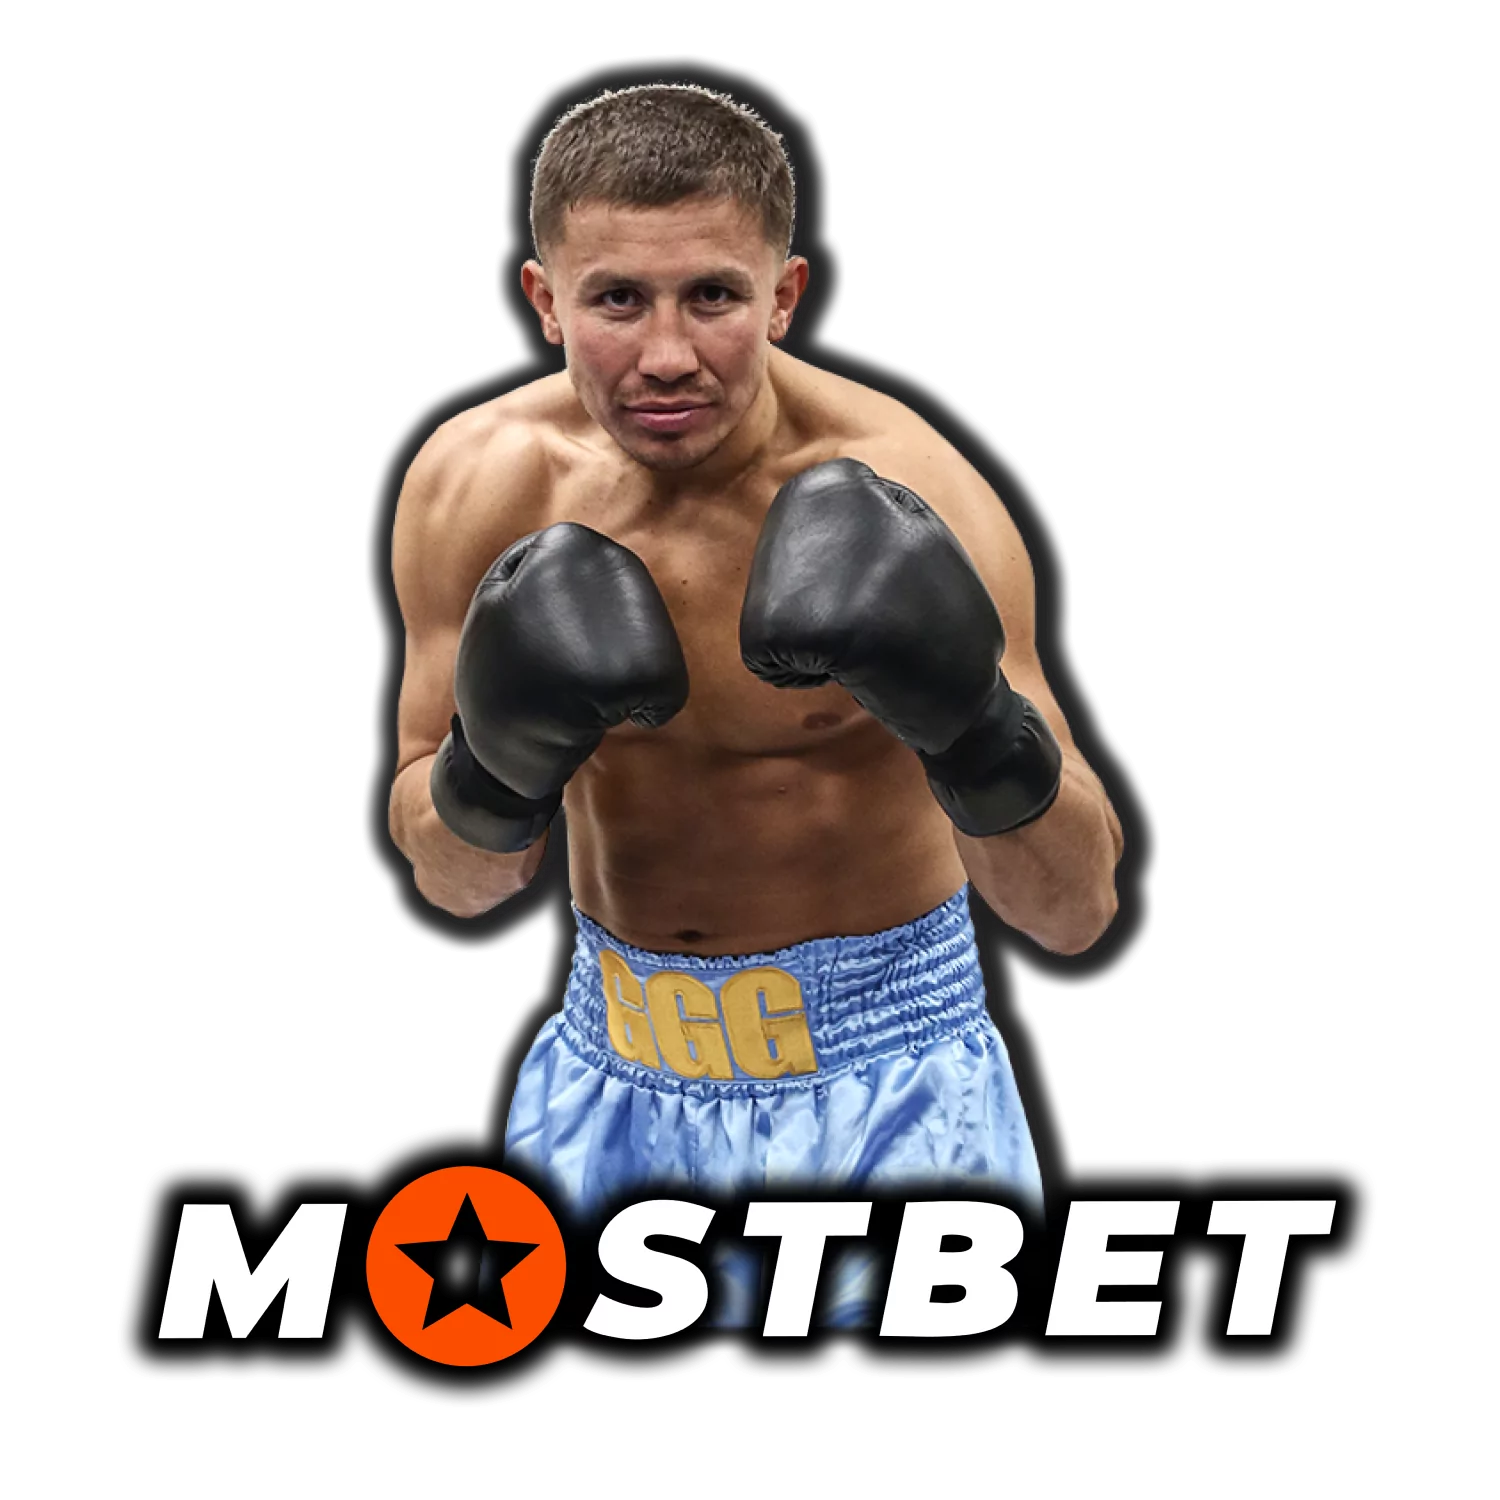 Place your bets on boxing with Mostbet.